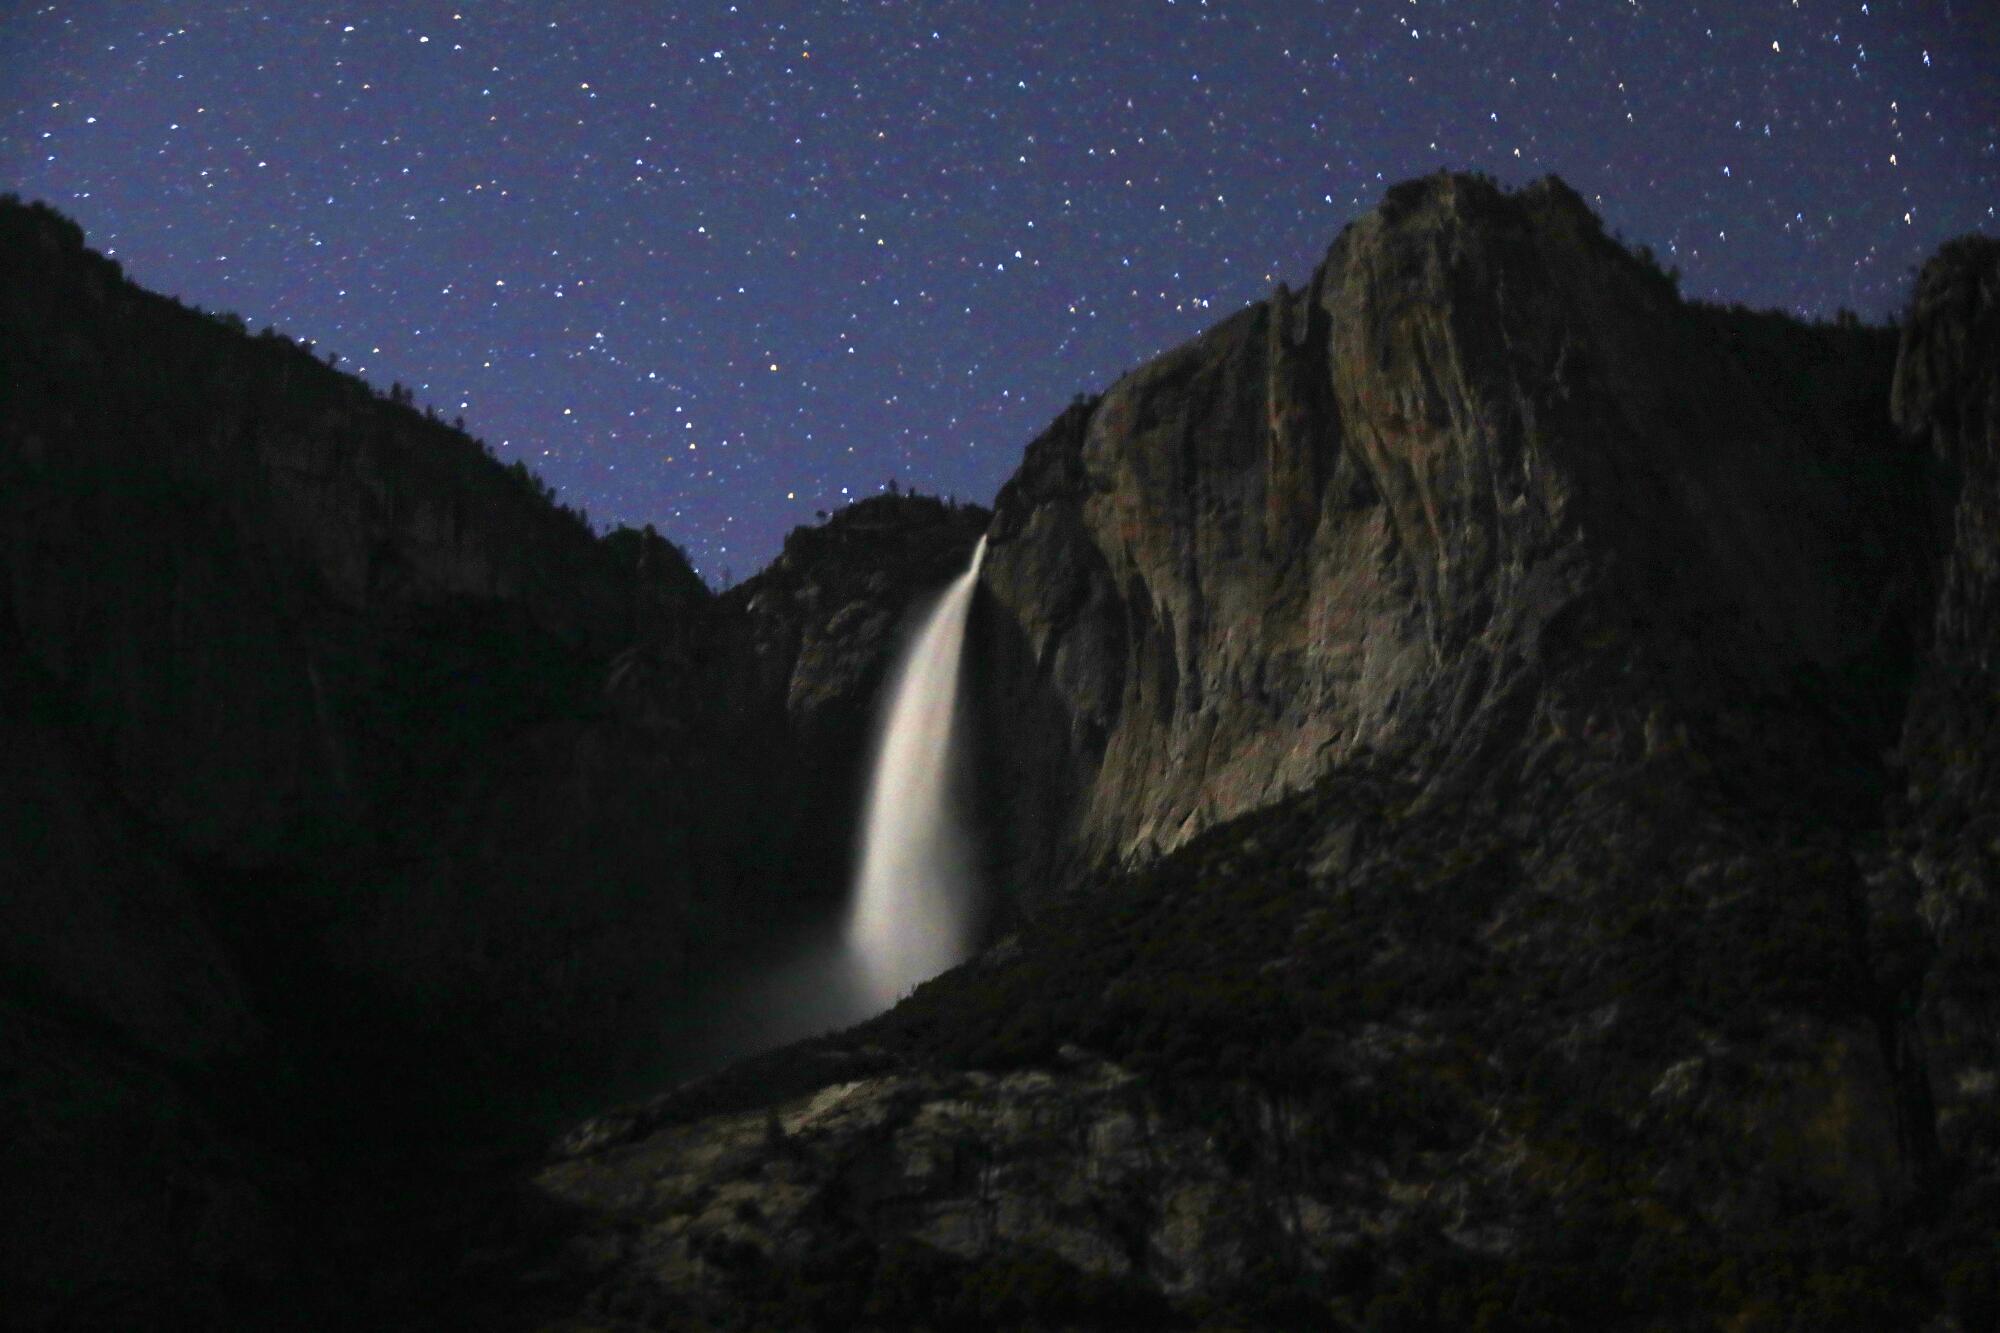 A large waterfall under a starry nighttime sky